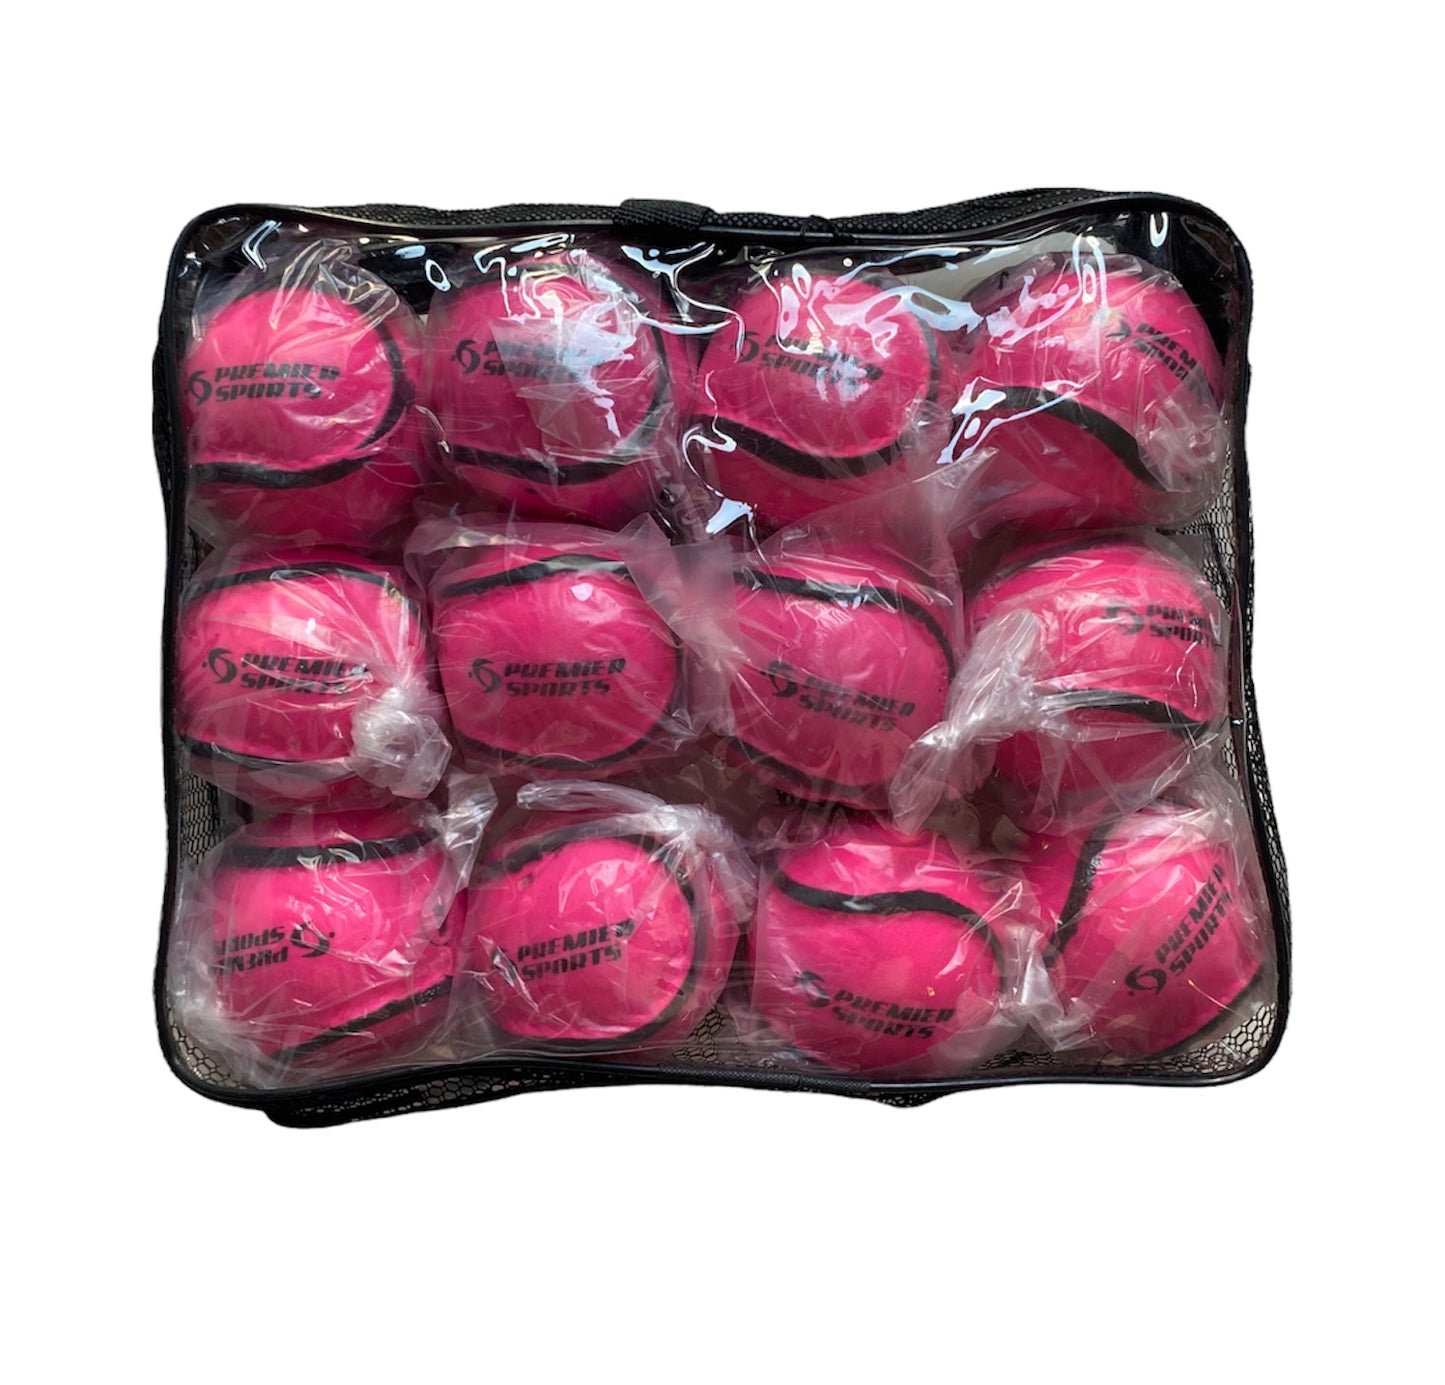 PREMIER SPORTS - WALL BALL PINK (SIZE 4) Bag of 12